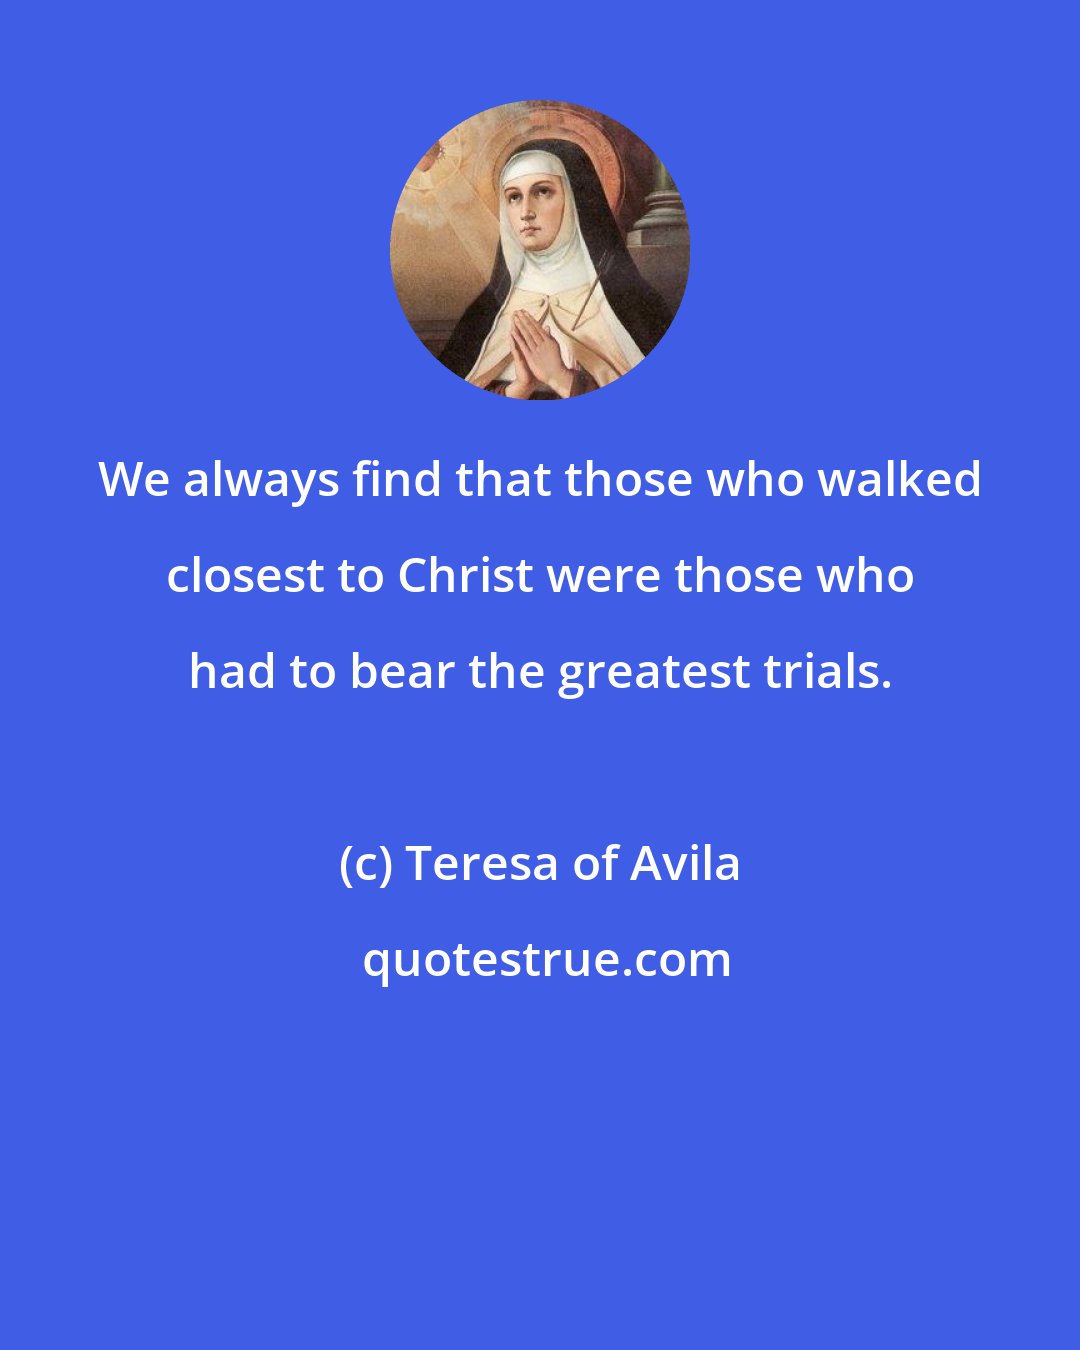 Teresa of Avila: We always find that those who walked closest to Christ were those who had to bear the greatest trials.